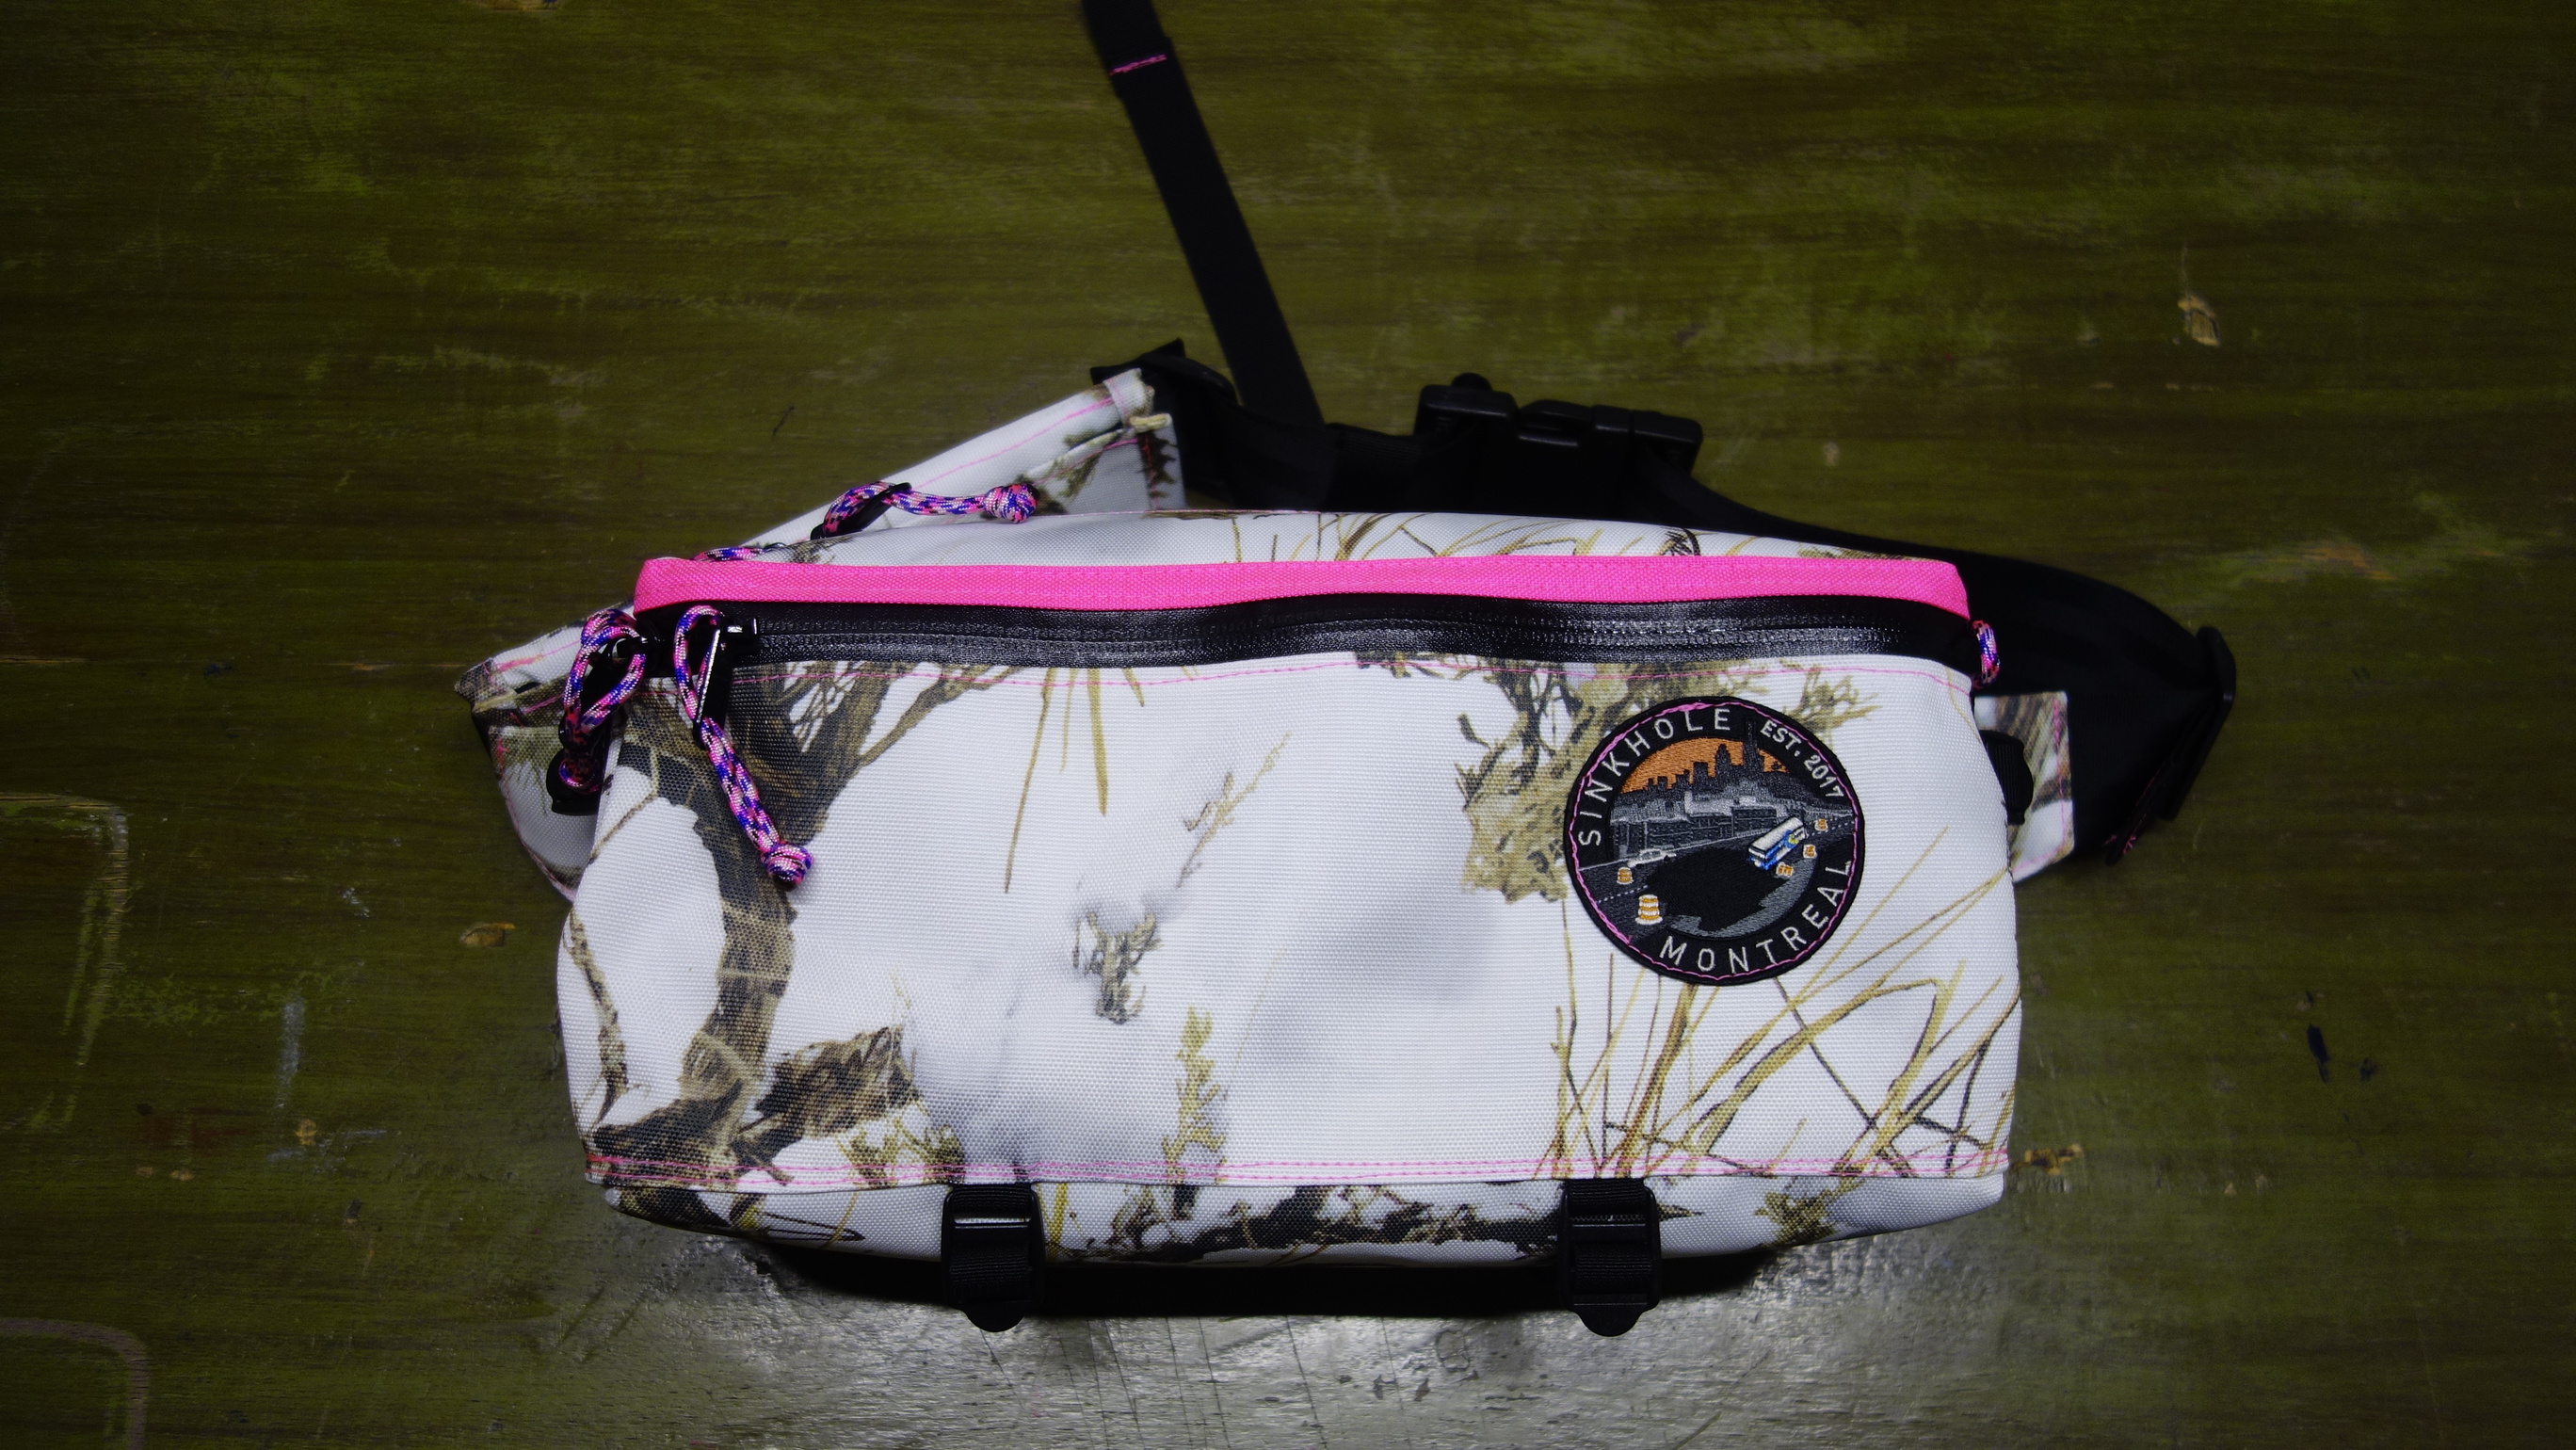 XL fannypack with a snow realtree camo pattern